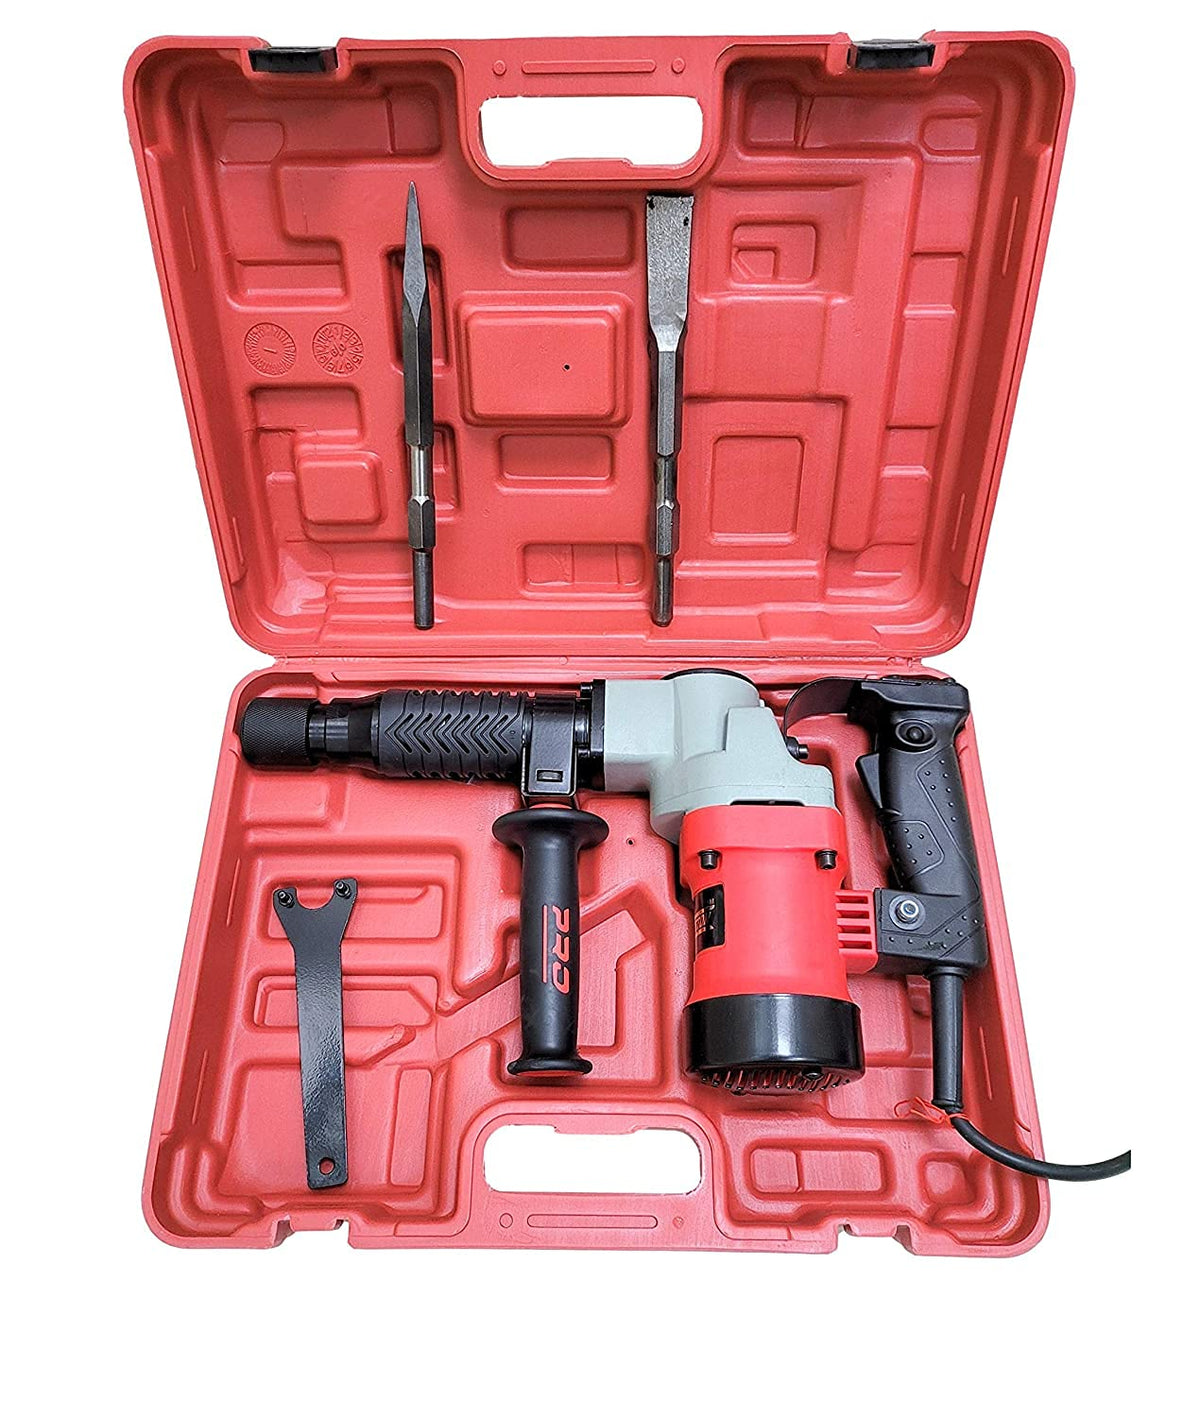 Cheston Powerful Corded Electric 5Kg Demolition Hammer/Concrete Breaker (RED) With Two Chisels Flat & Pointed With Anti Vibration Control Handle (18mm Chuck) 900W high-speed 2950 rounds